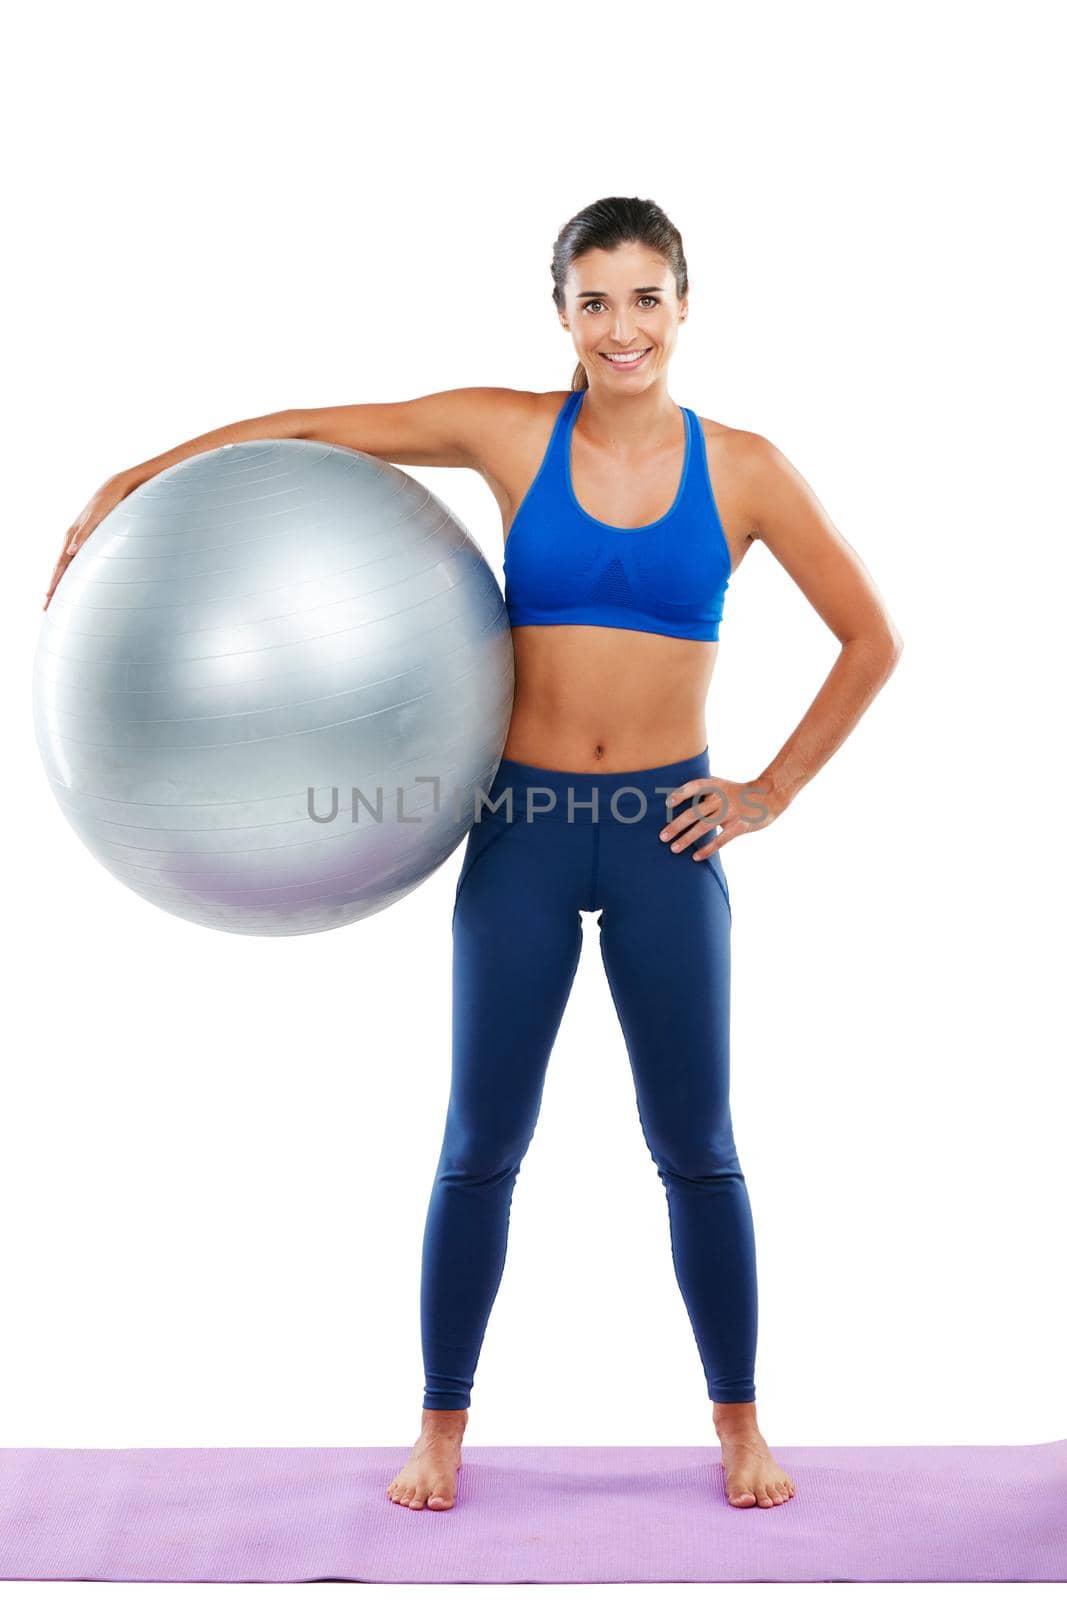 Its the best way to exercise. Portrait of a sporty young woman holding an exercise ball against a white background. by YuriArcurs